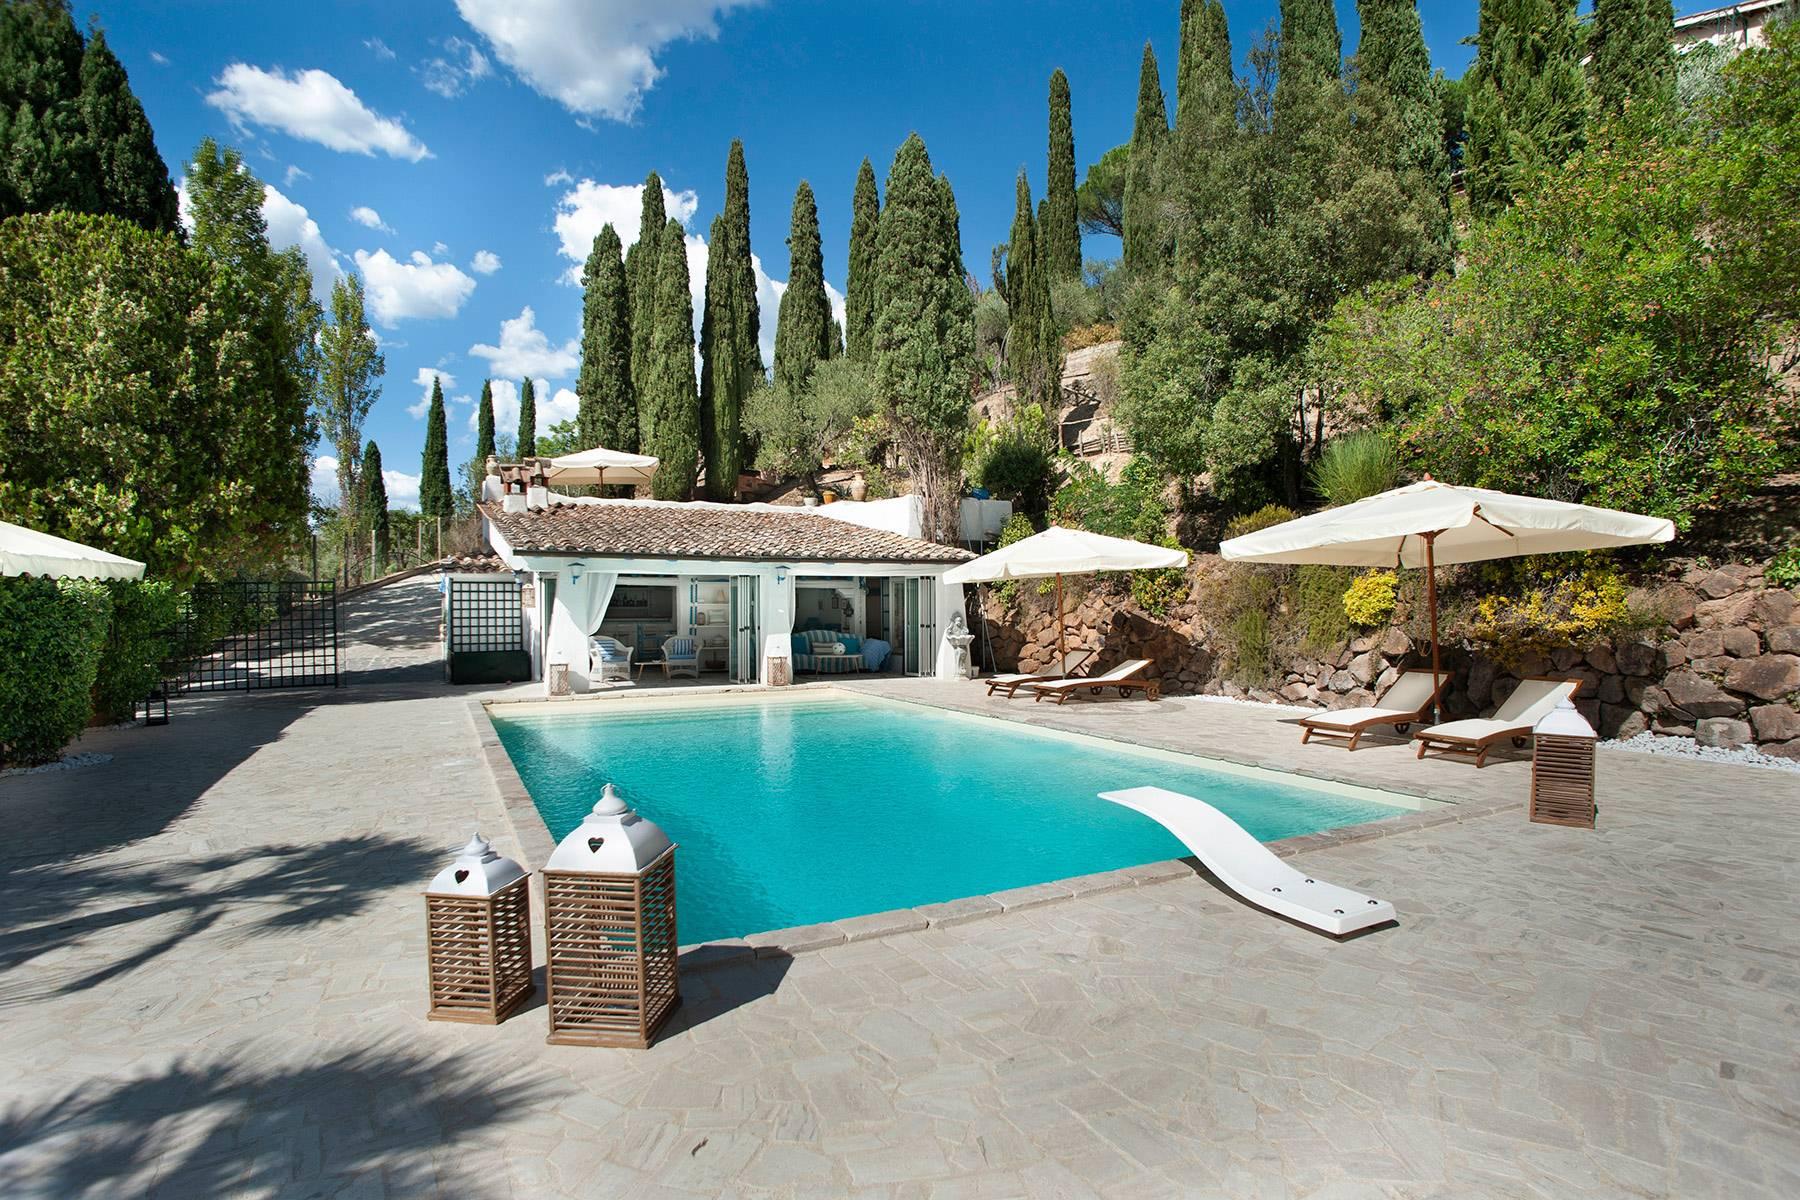 Villa Nayara - Lovely mansion with swimming pool 30 minutes from Rome - 15